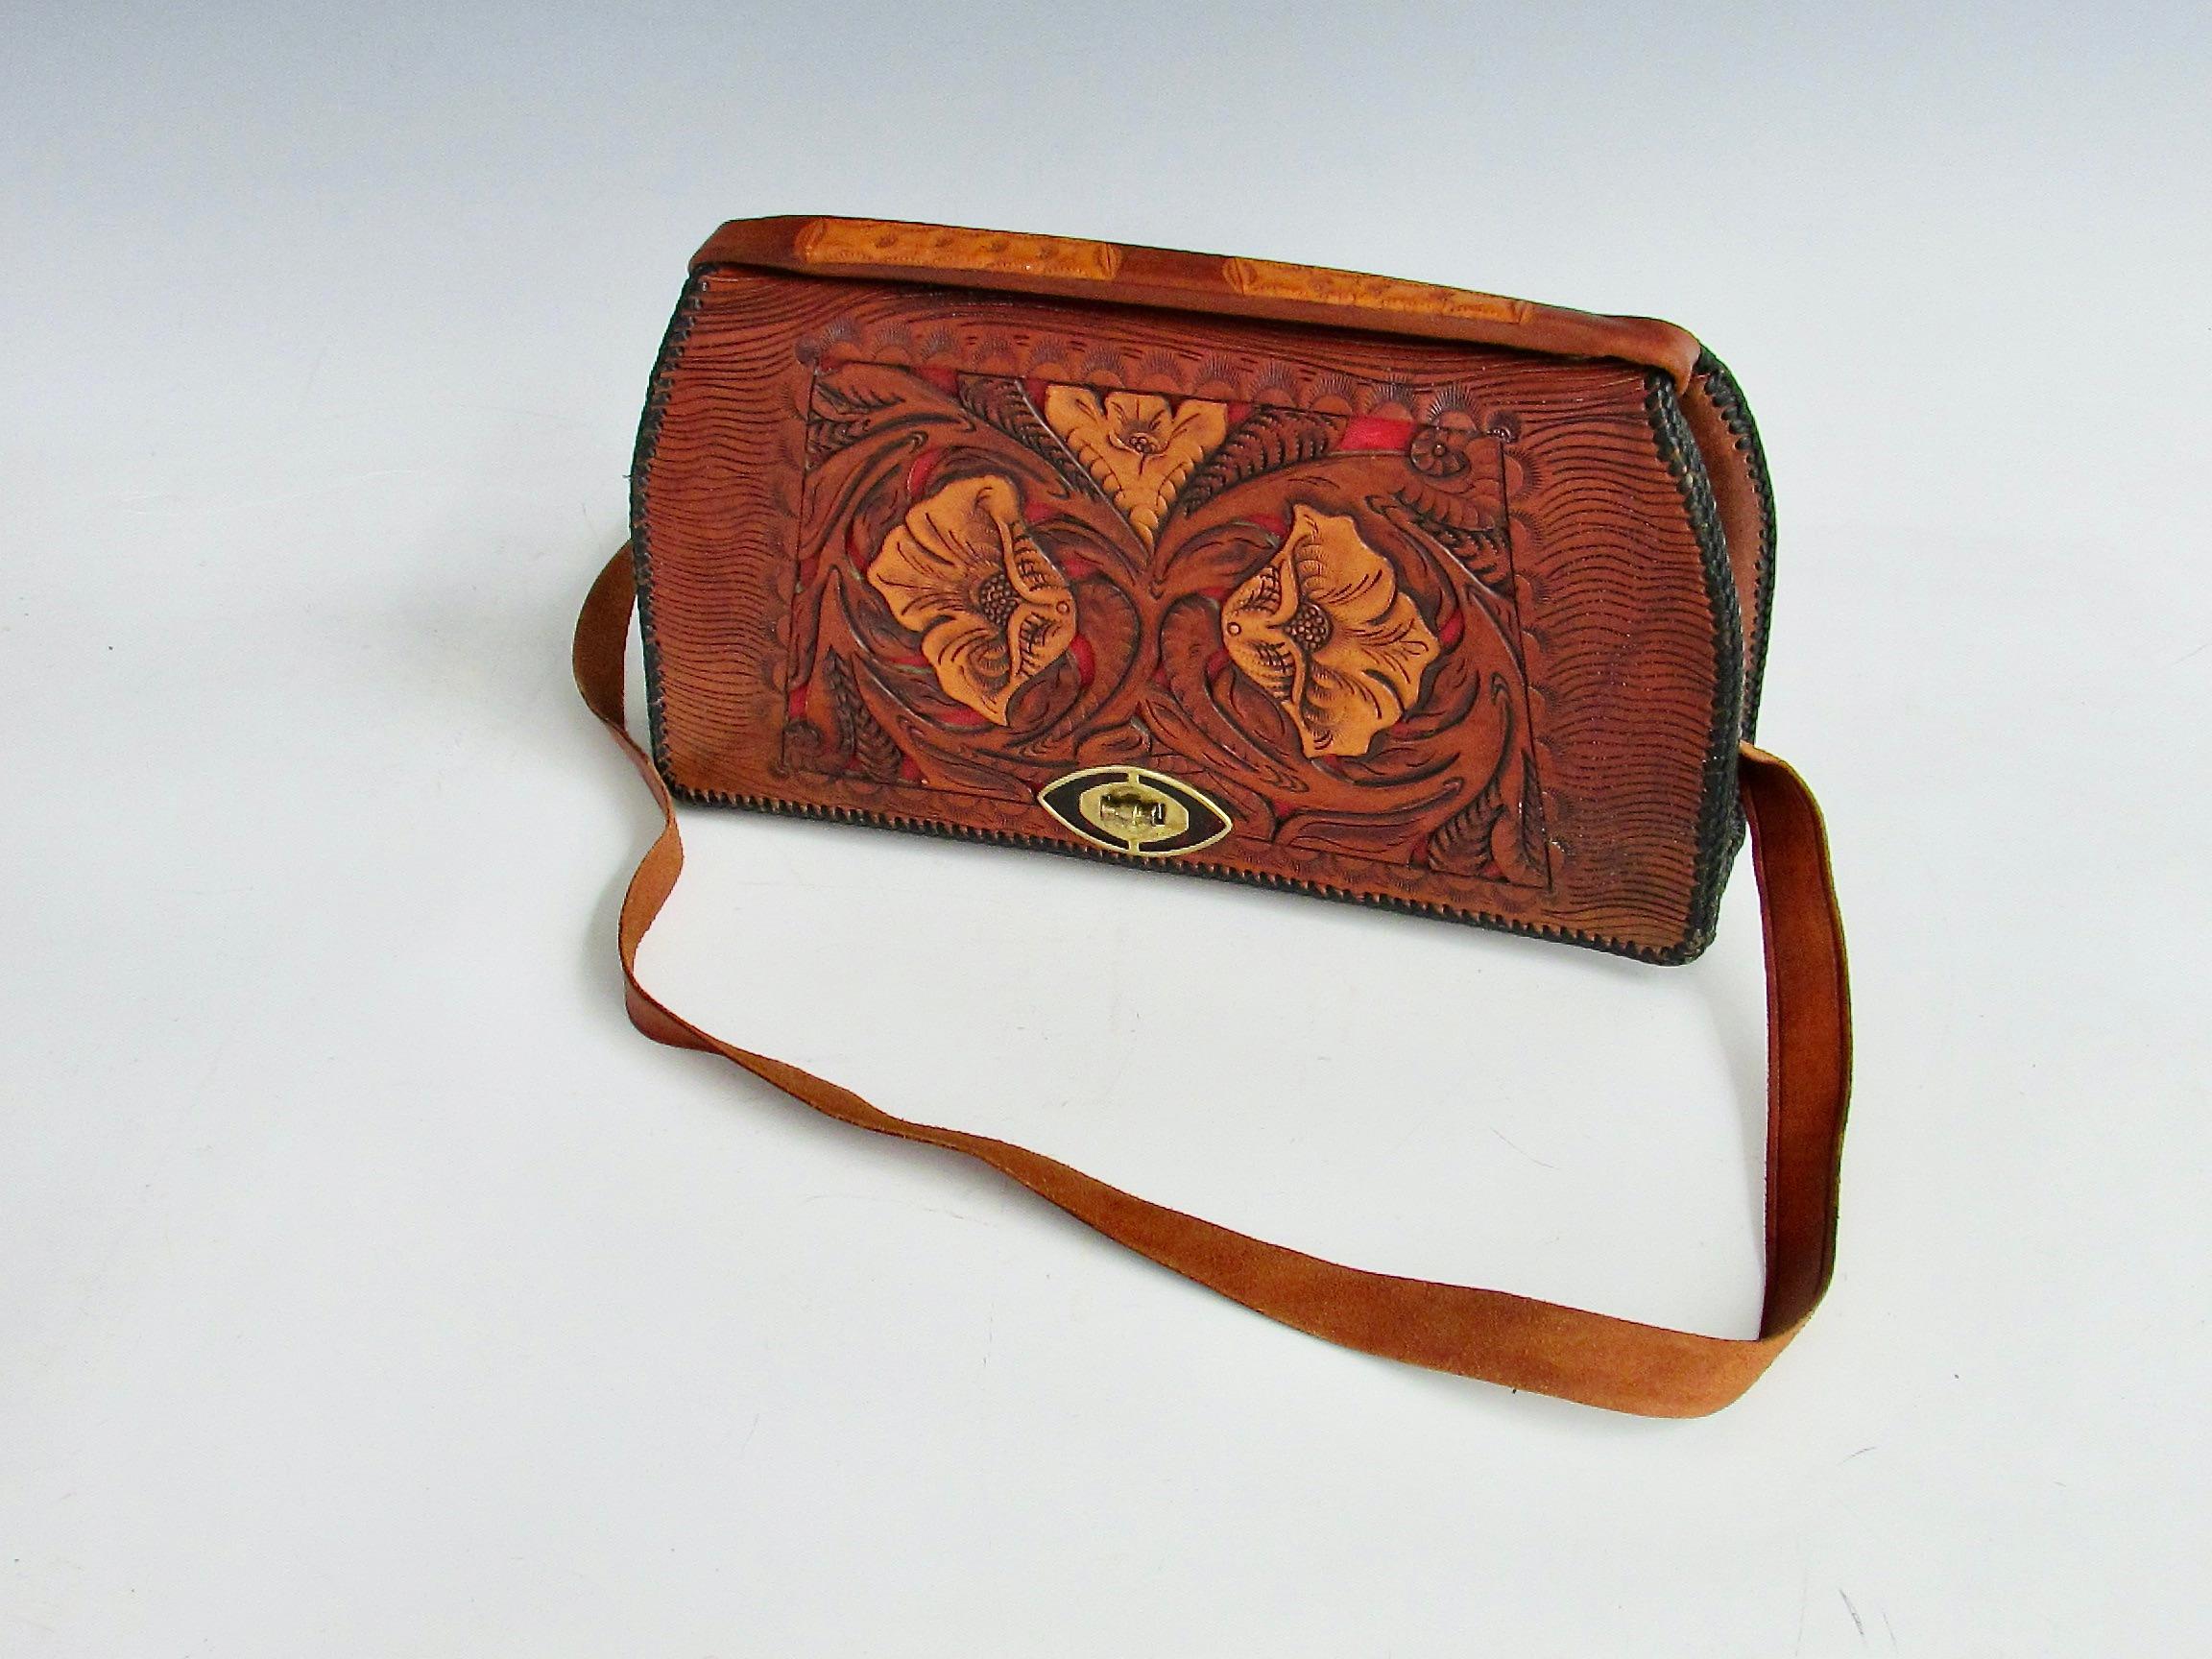 American Classical 1950s fine Tooled Leather Western Theme Ladies Handbag Purse For Sale